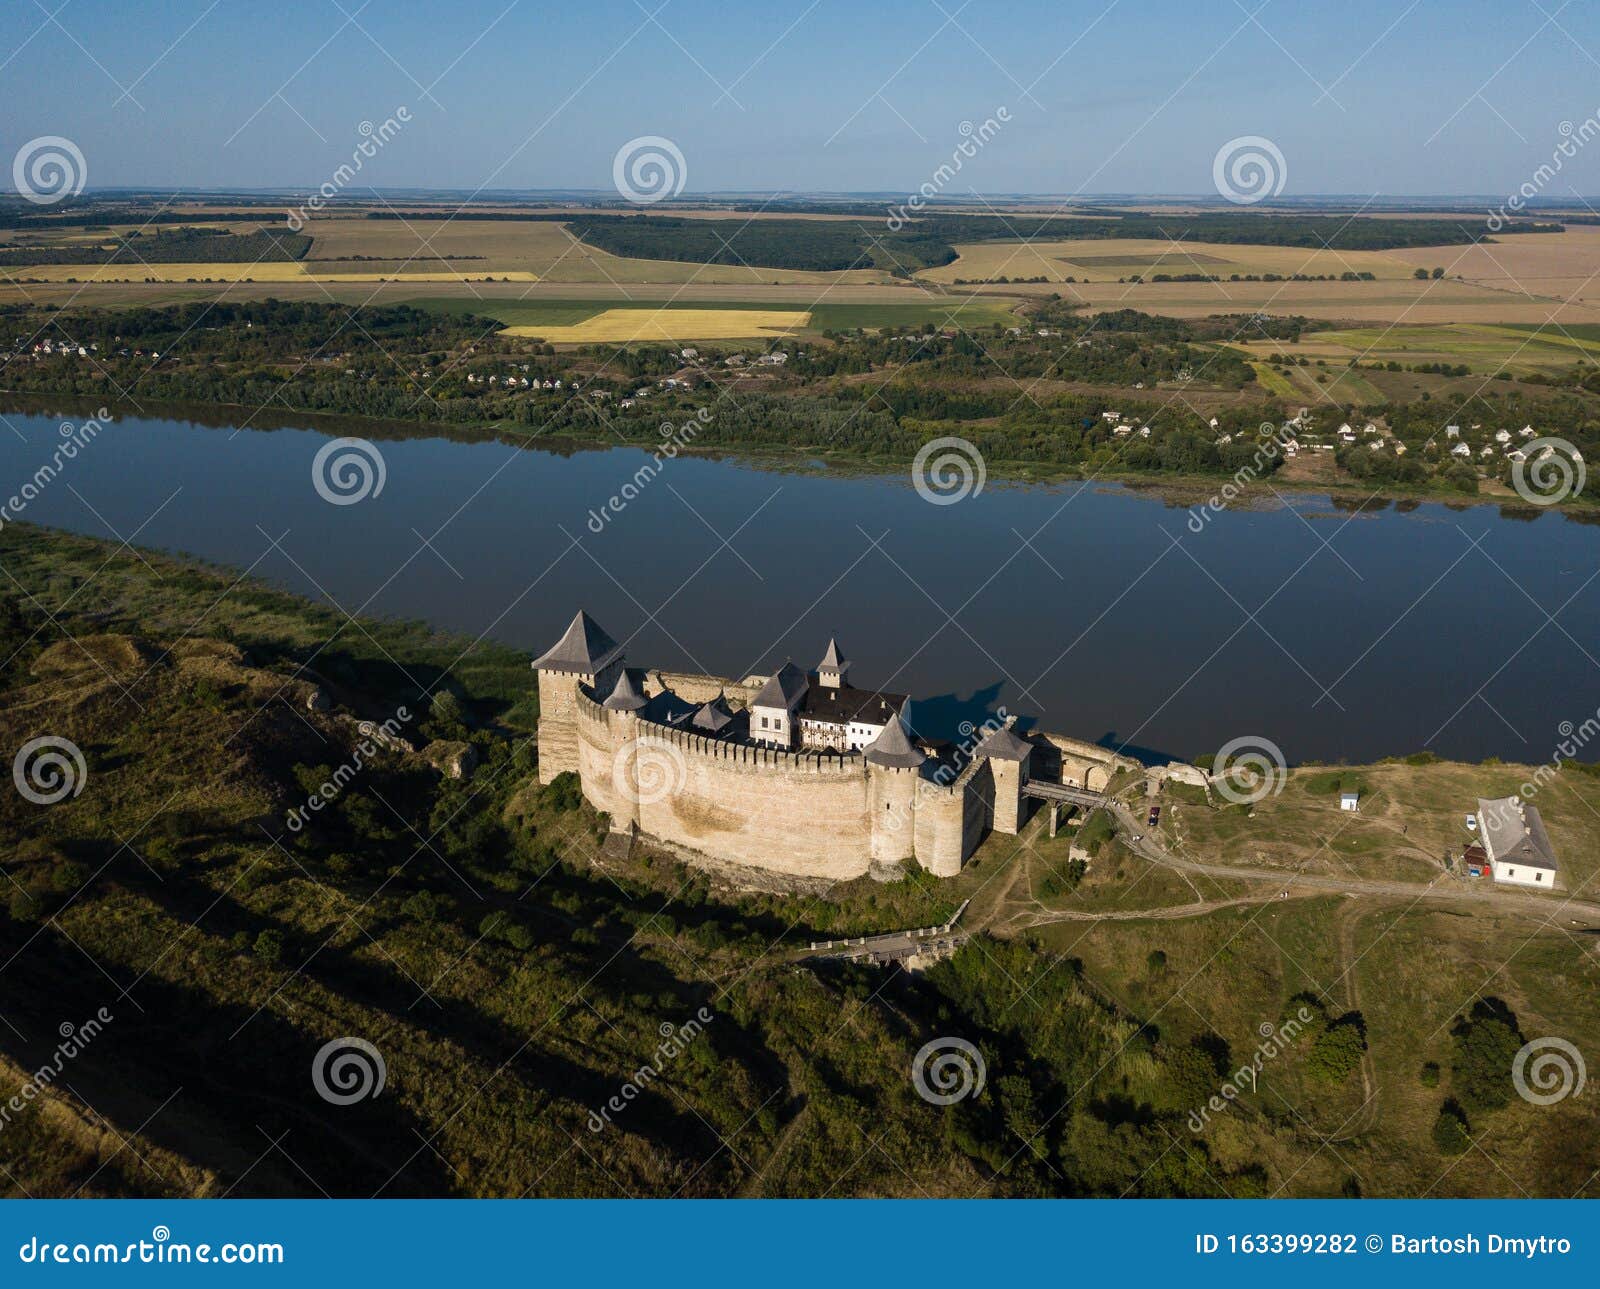 medieval fortress in the khotyn town west ukraine. the castle is the seventh wonder of ukraine